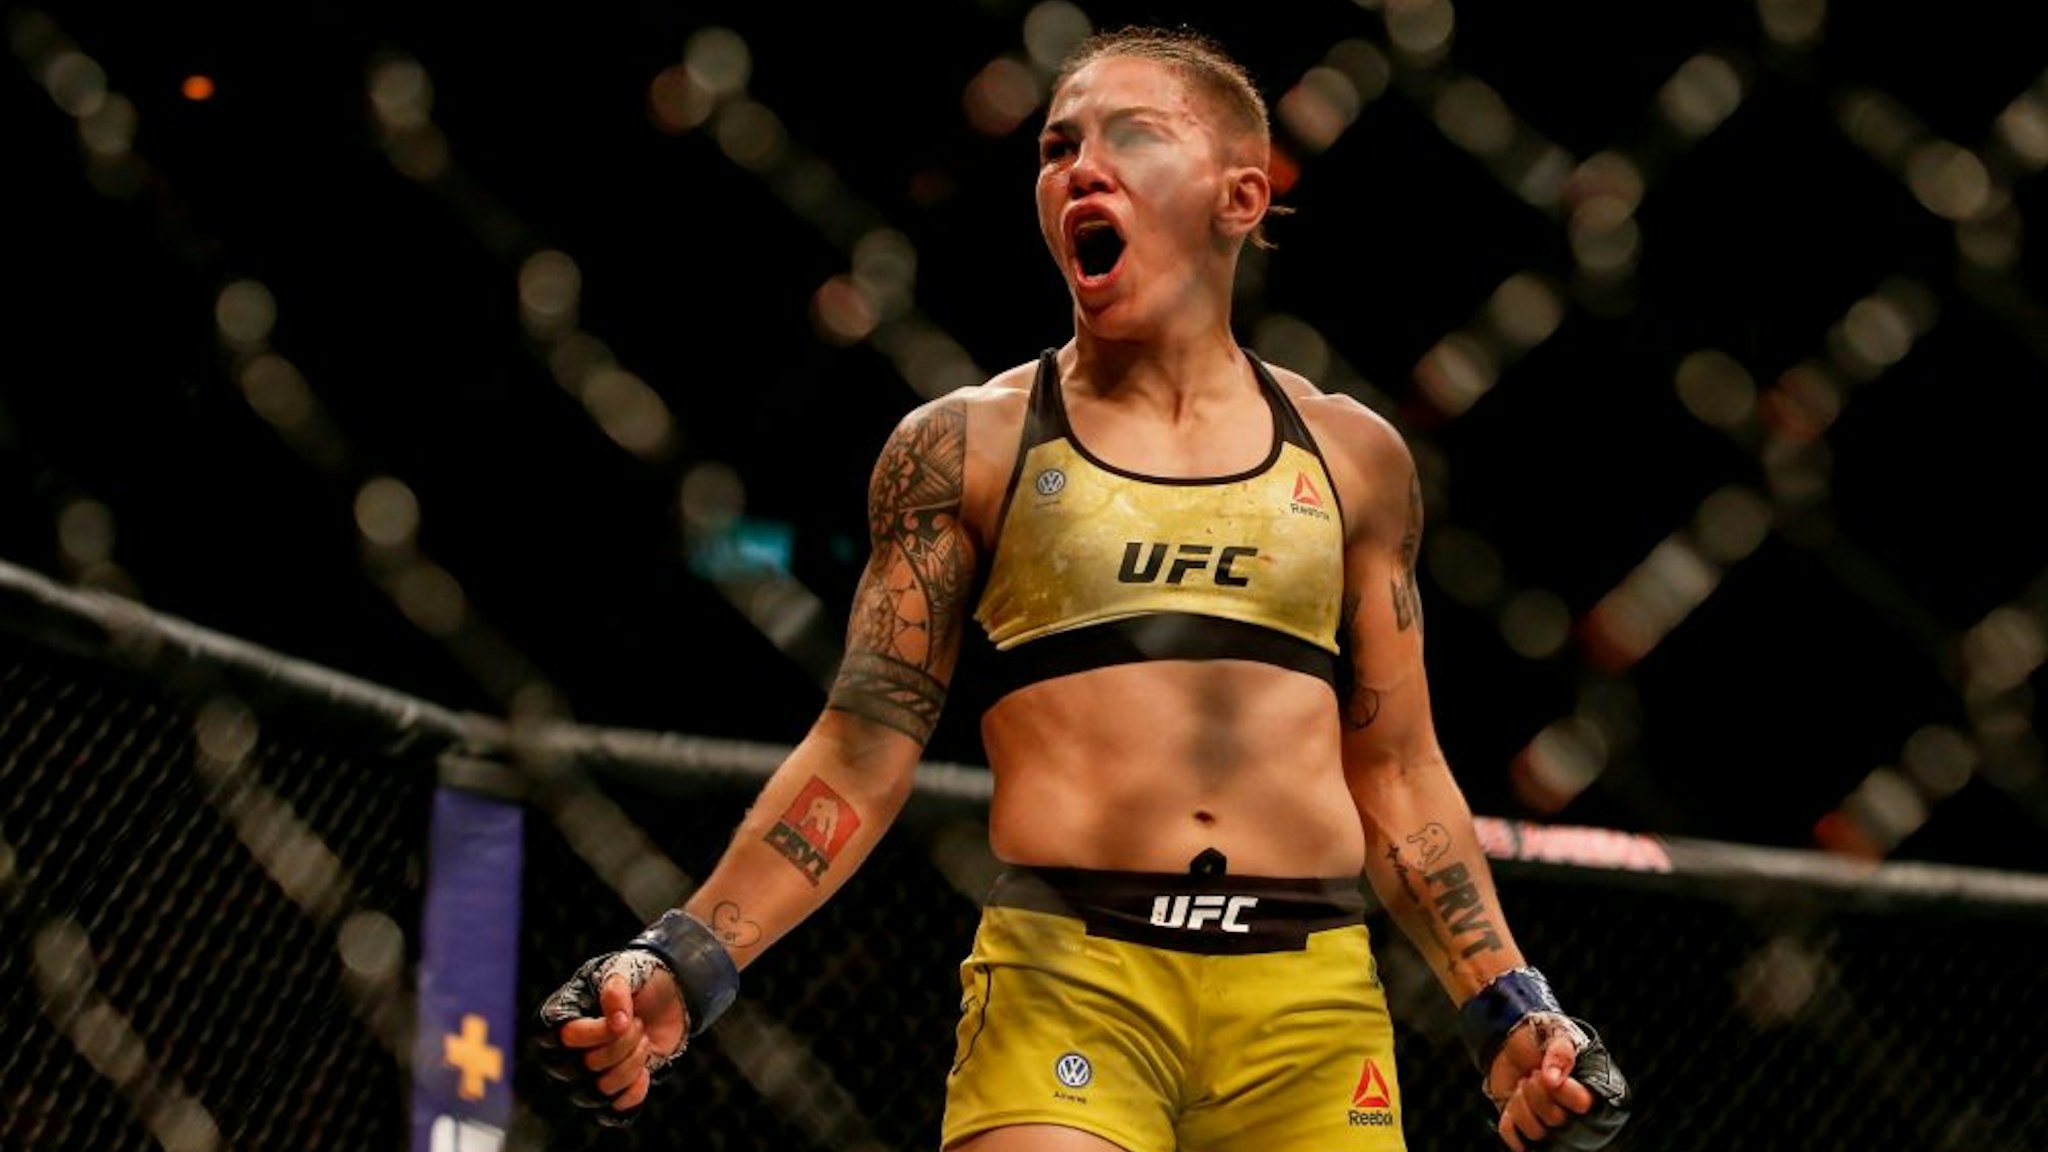 RIO DE JANEIRO, BRAZIL - MAY 11: Jessica Andrade of Brazil celebrates after her knockout victory over Rose Namajunas of USA in their women's strawweight championship bout during the UFC 237 event at Jeunesse Arena on May 11, 2019 in Rio de Janeiro, Brazil.